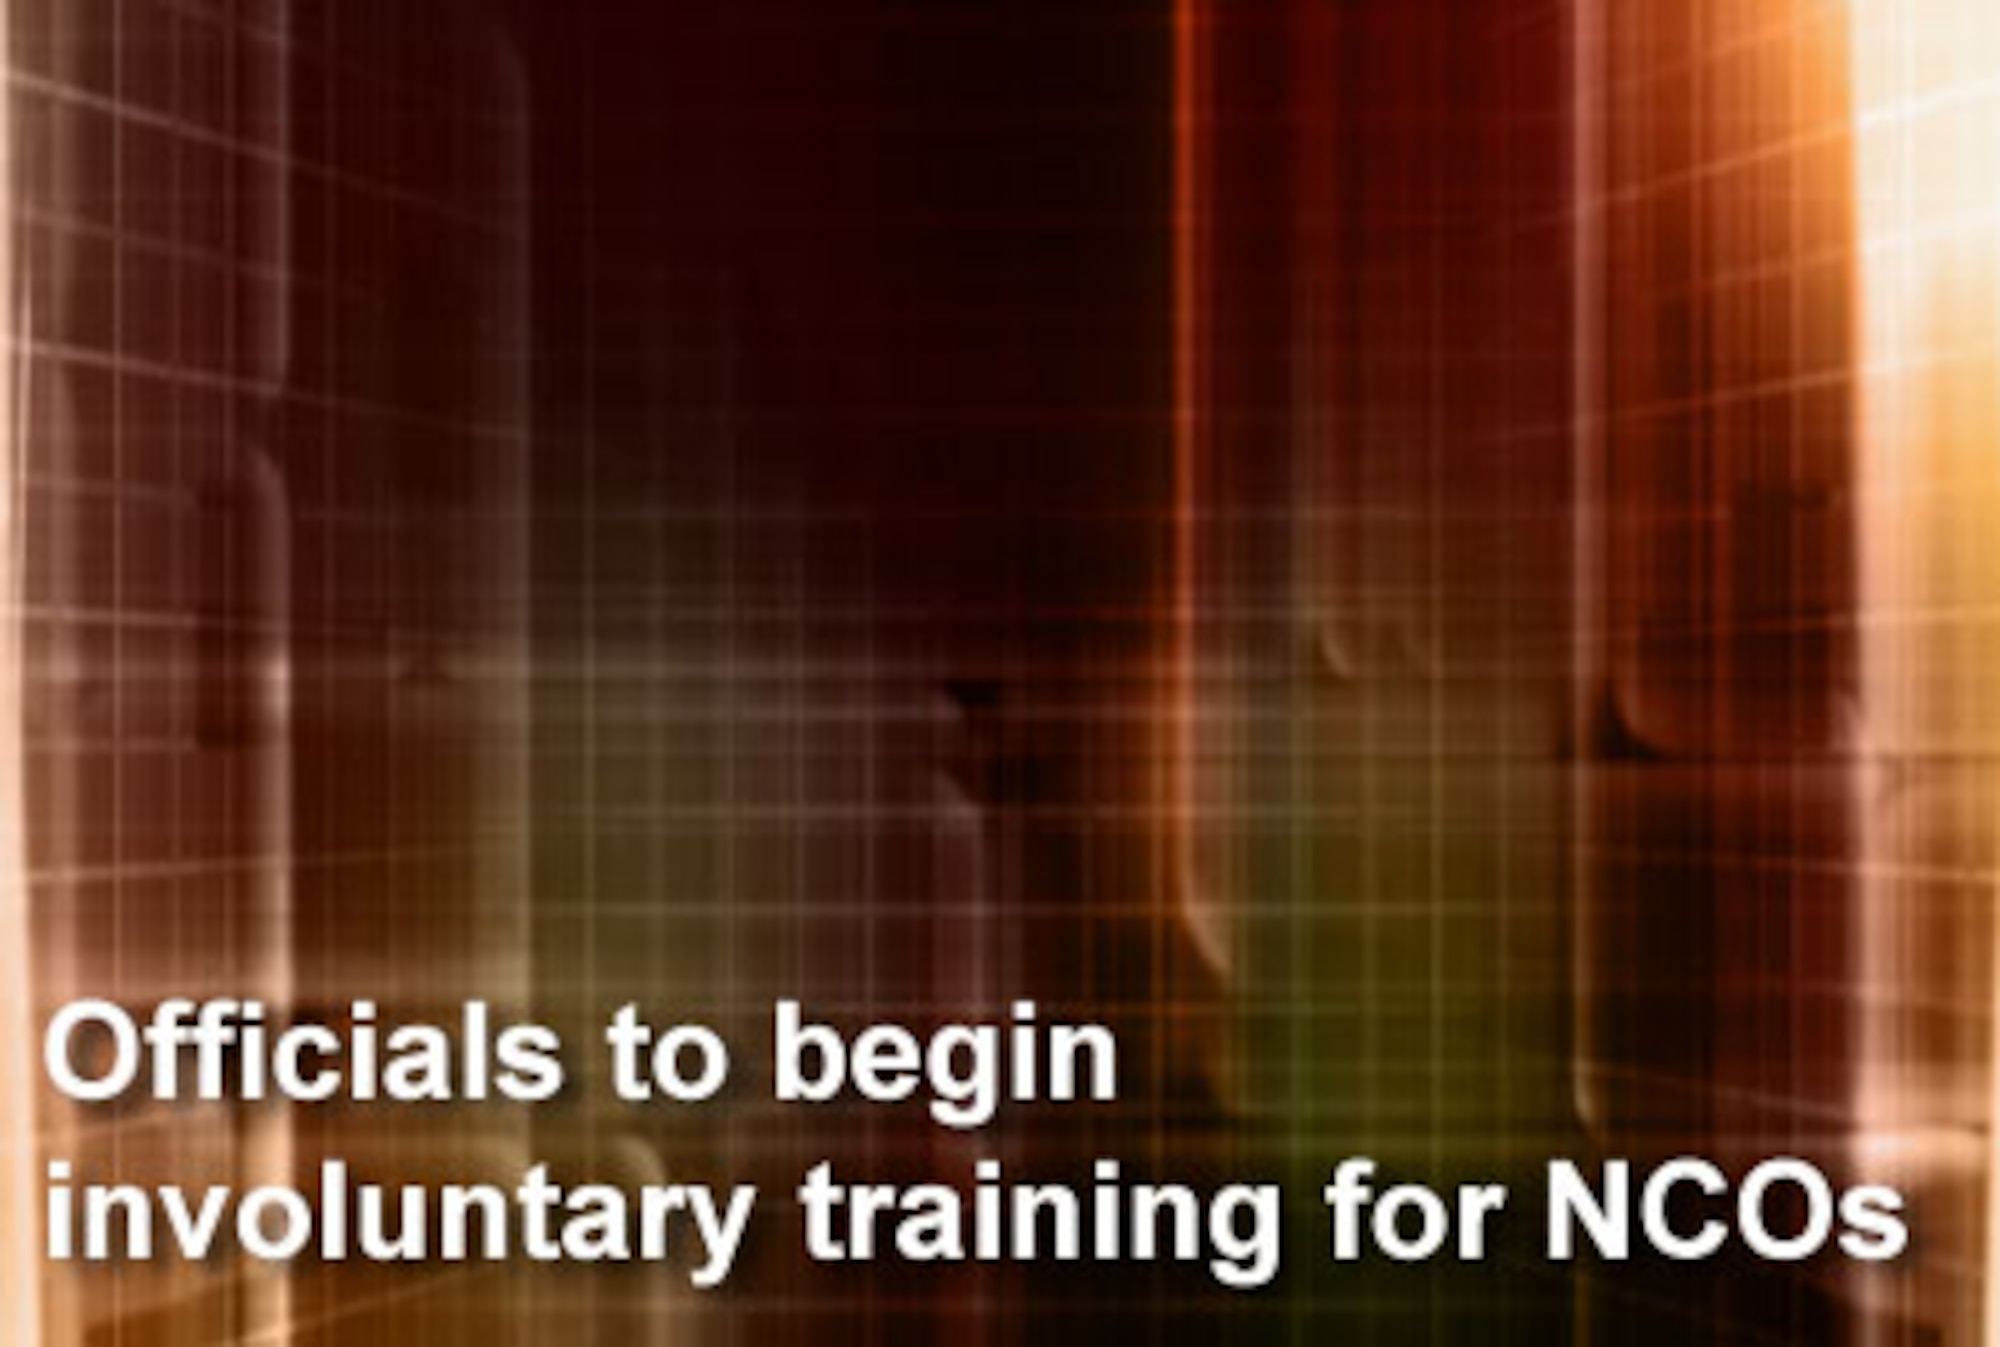 More than 300 additional Airmen are needed to retrain to ensure all Air Force career fields are equally manned. Phase II, which identifies non-volunteers for retraining, begins Dec. 14. Airmen have until Jan. 22, 2010, to submit a completed retraining package for the Air Force specialty code for which they are selected. 
